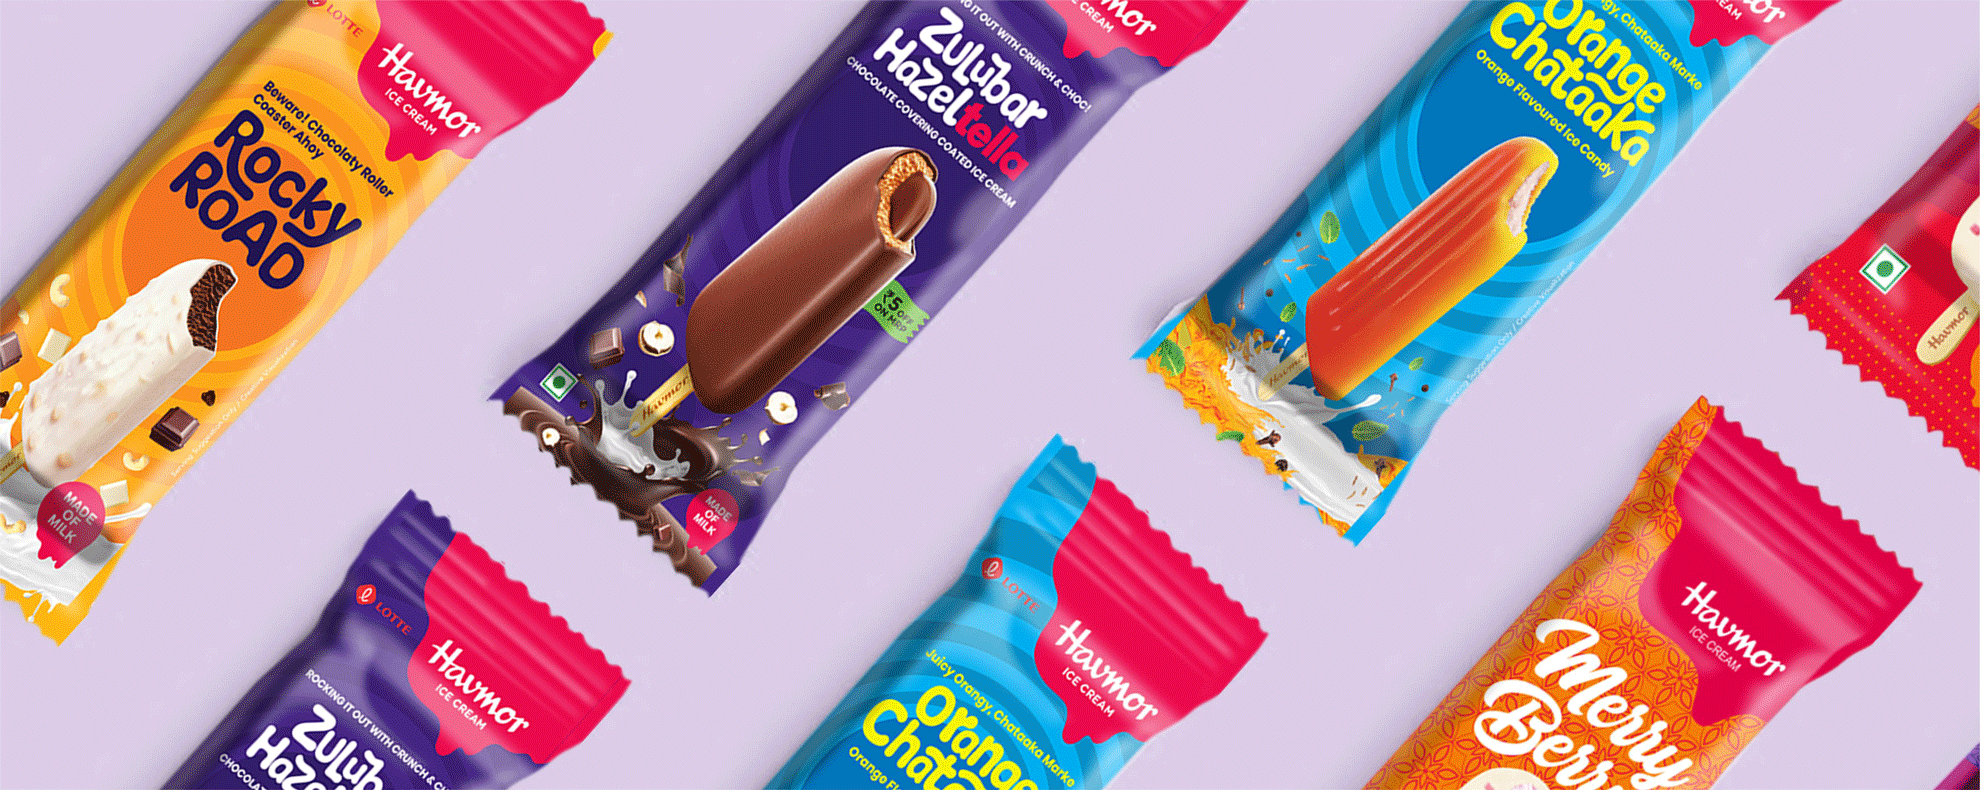 Different choco bars of havmor packaging design